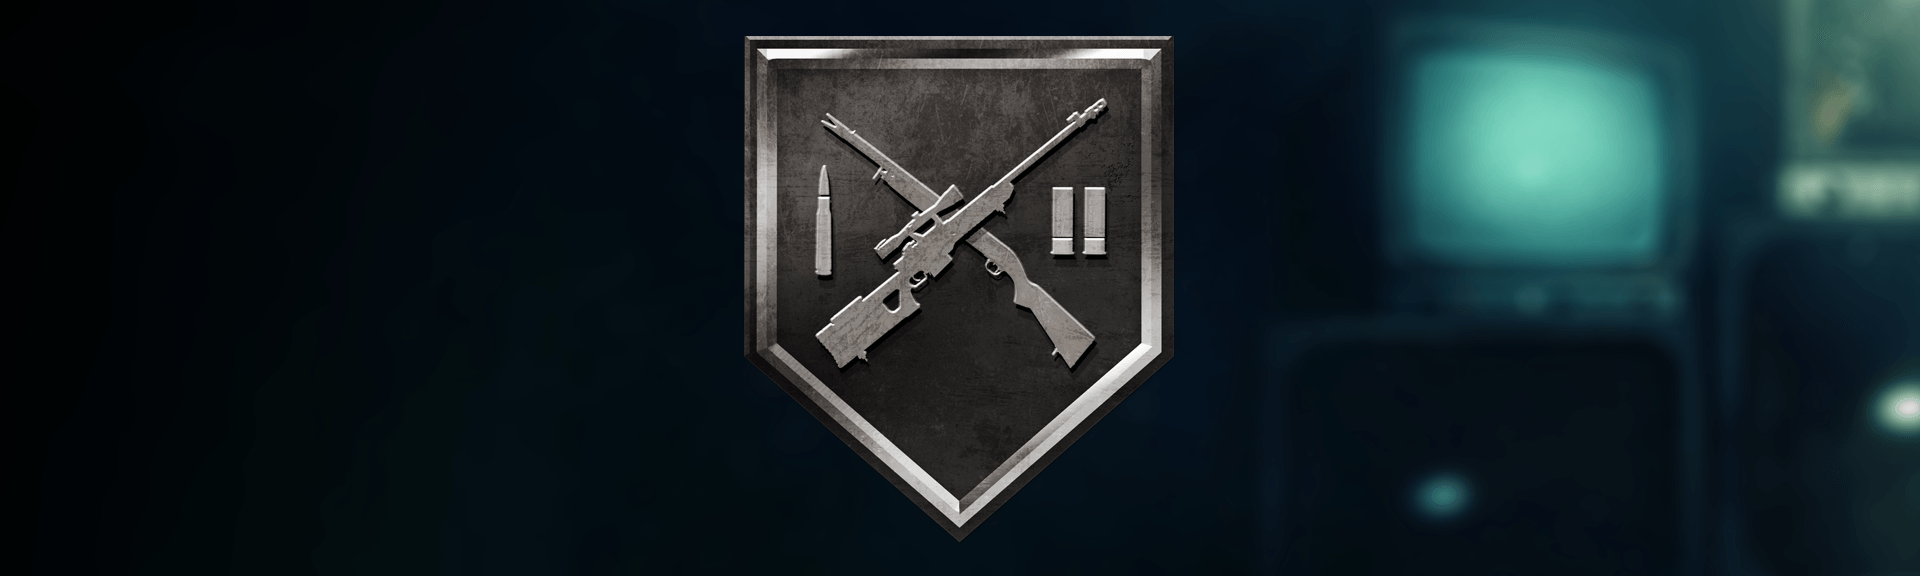 Scopes and Scatterguns mode icon